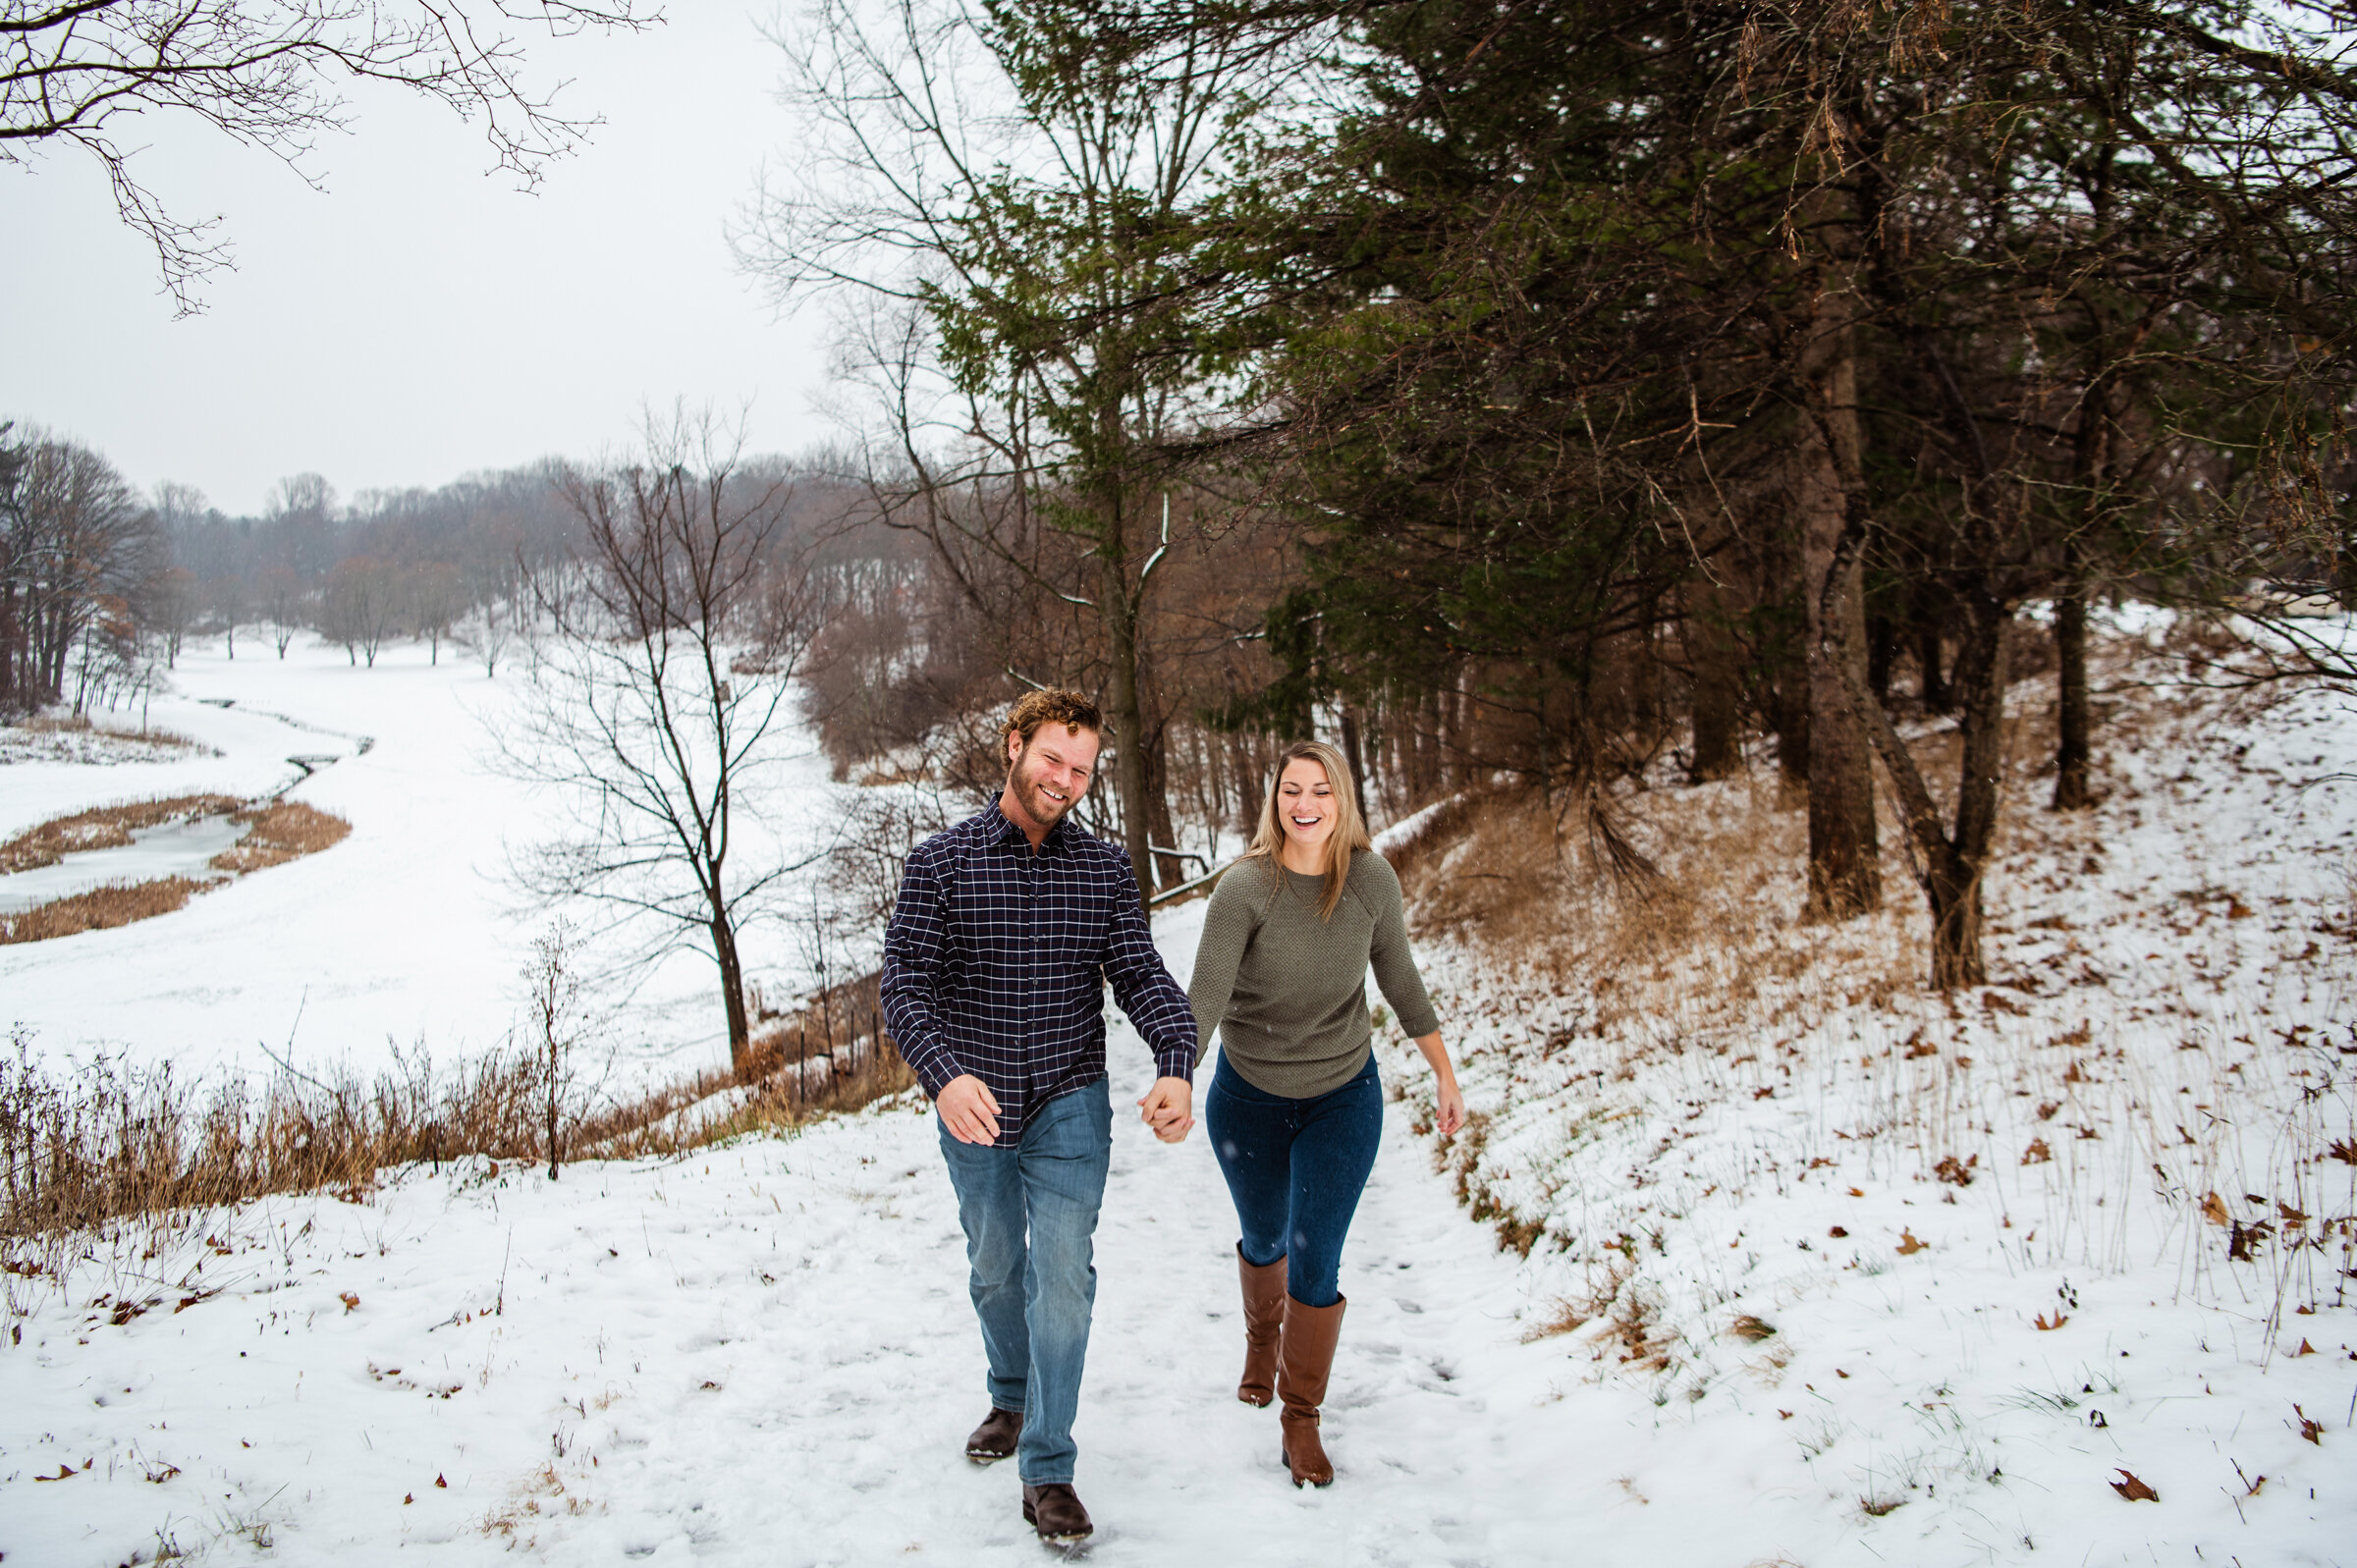 Irondequoit_Beer_Company_Durand_Eastman_Park_Rochester_Engagement_Session_JILL_STUDIO_Rochester_NY_Photographer_7082.jpg